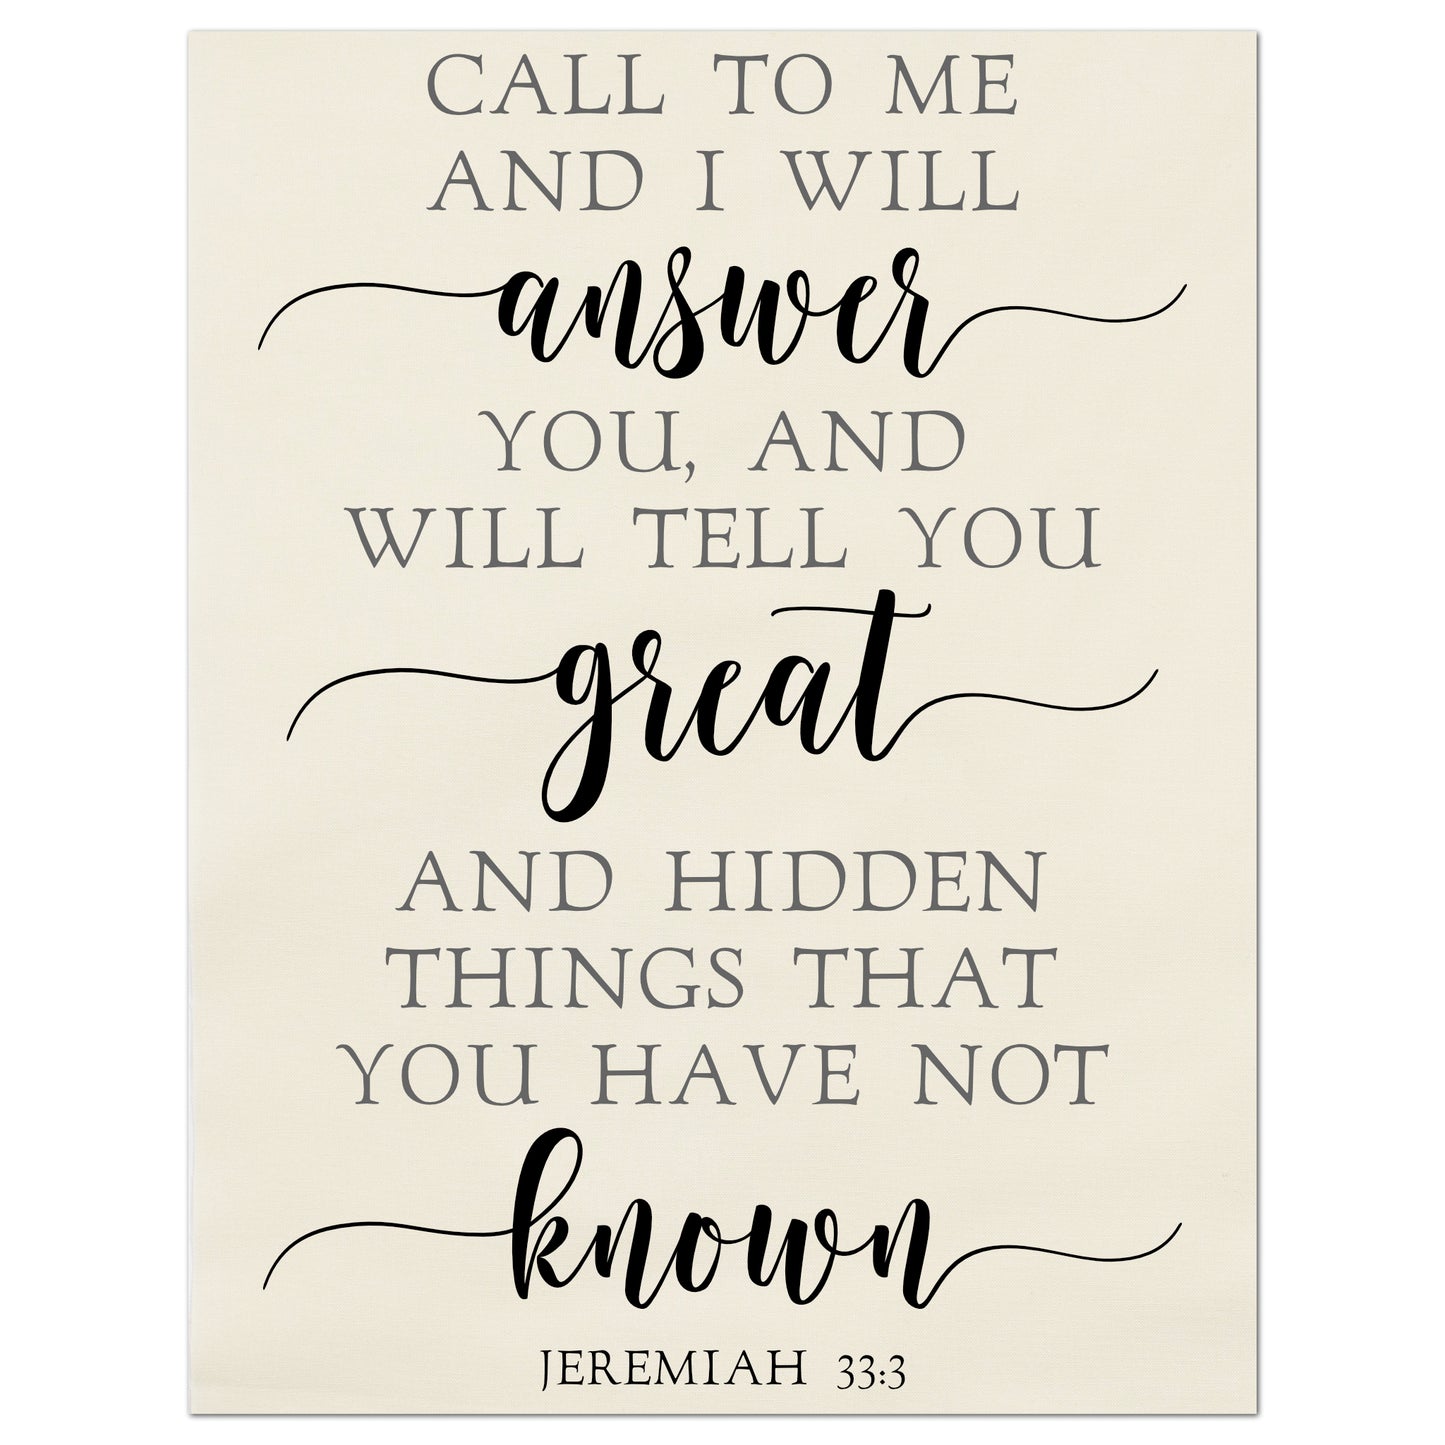 Call to me and I will answer you, and will tell you great and hidden things that you have not known.  - Jeremiah 33:3, Quilt Block, Fabric Panel Print, Scripture Fabric